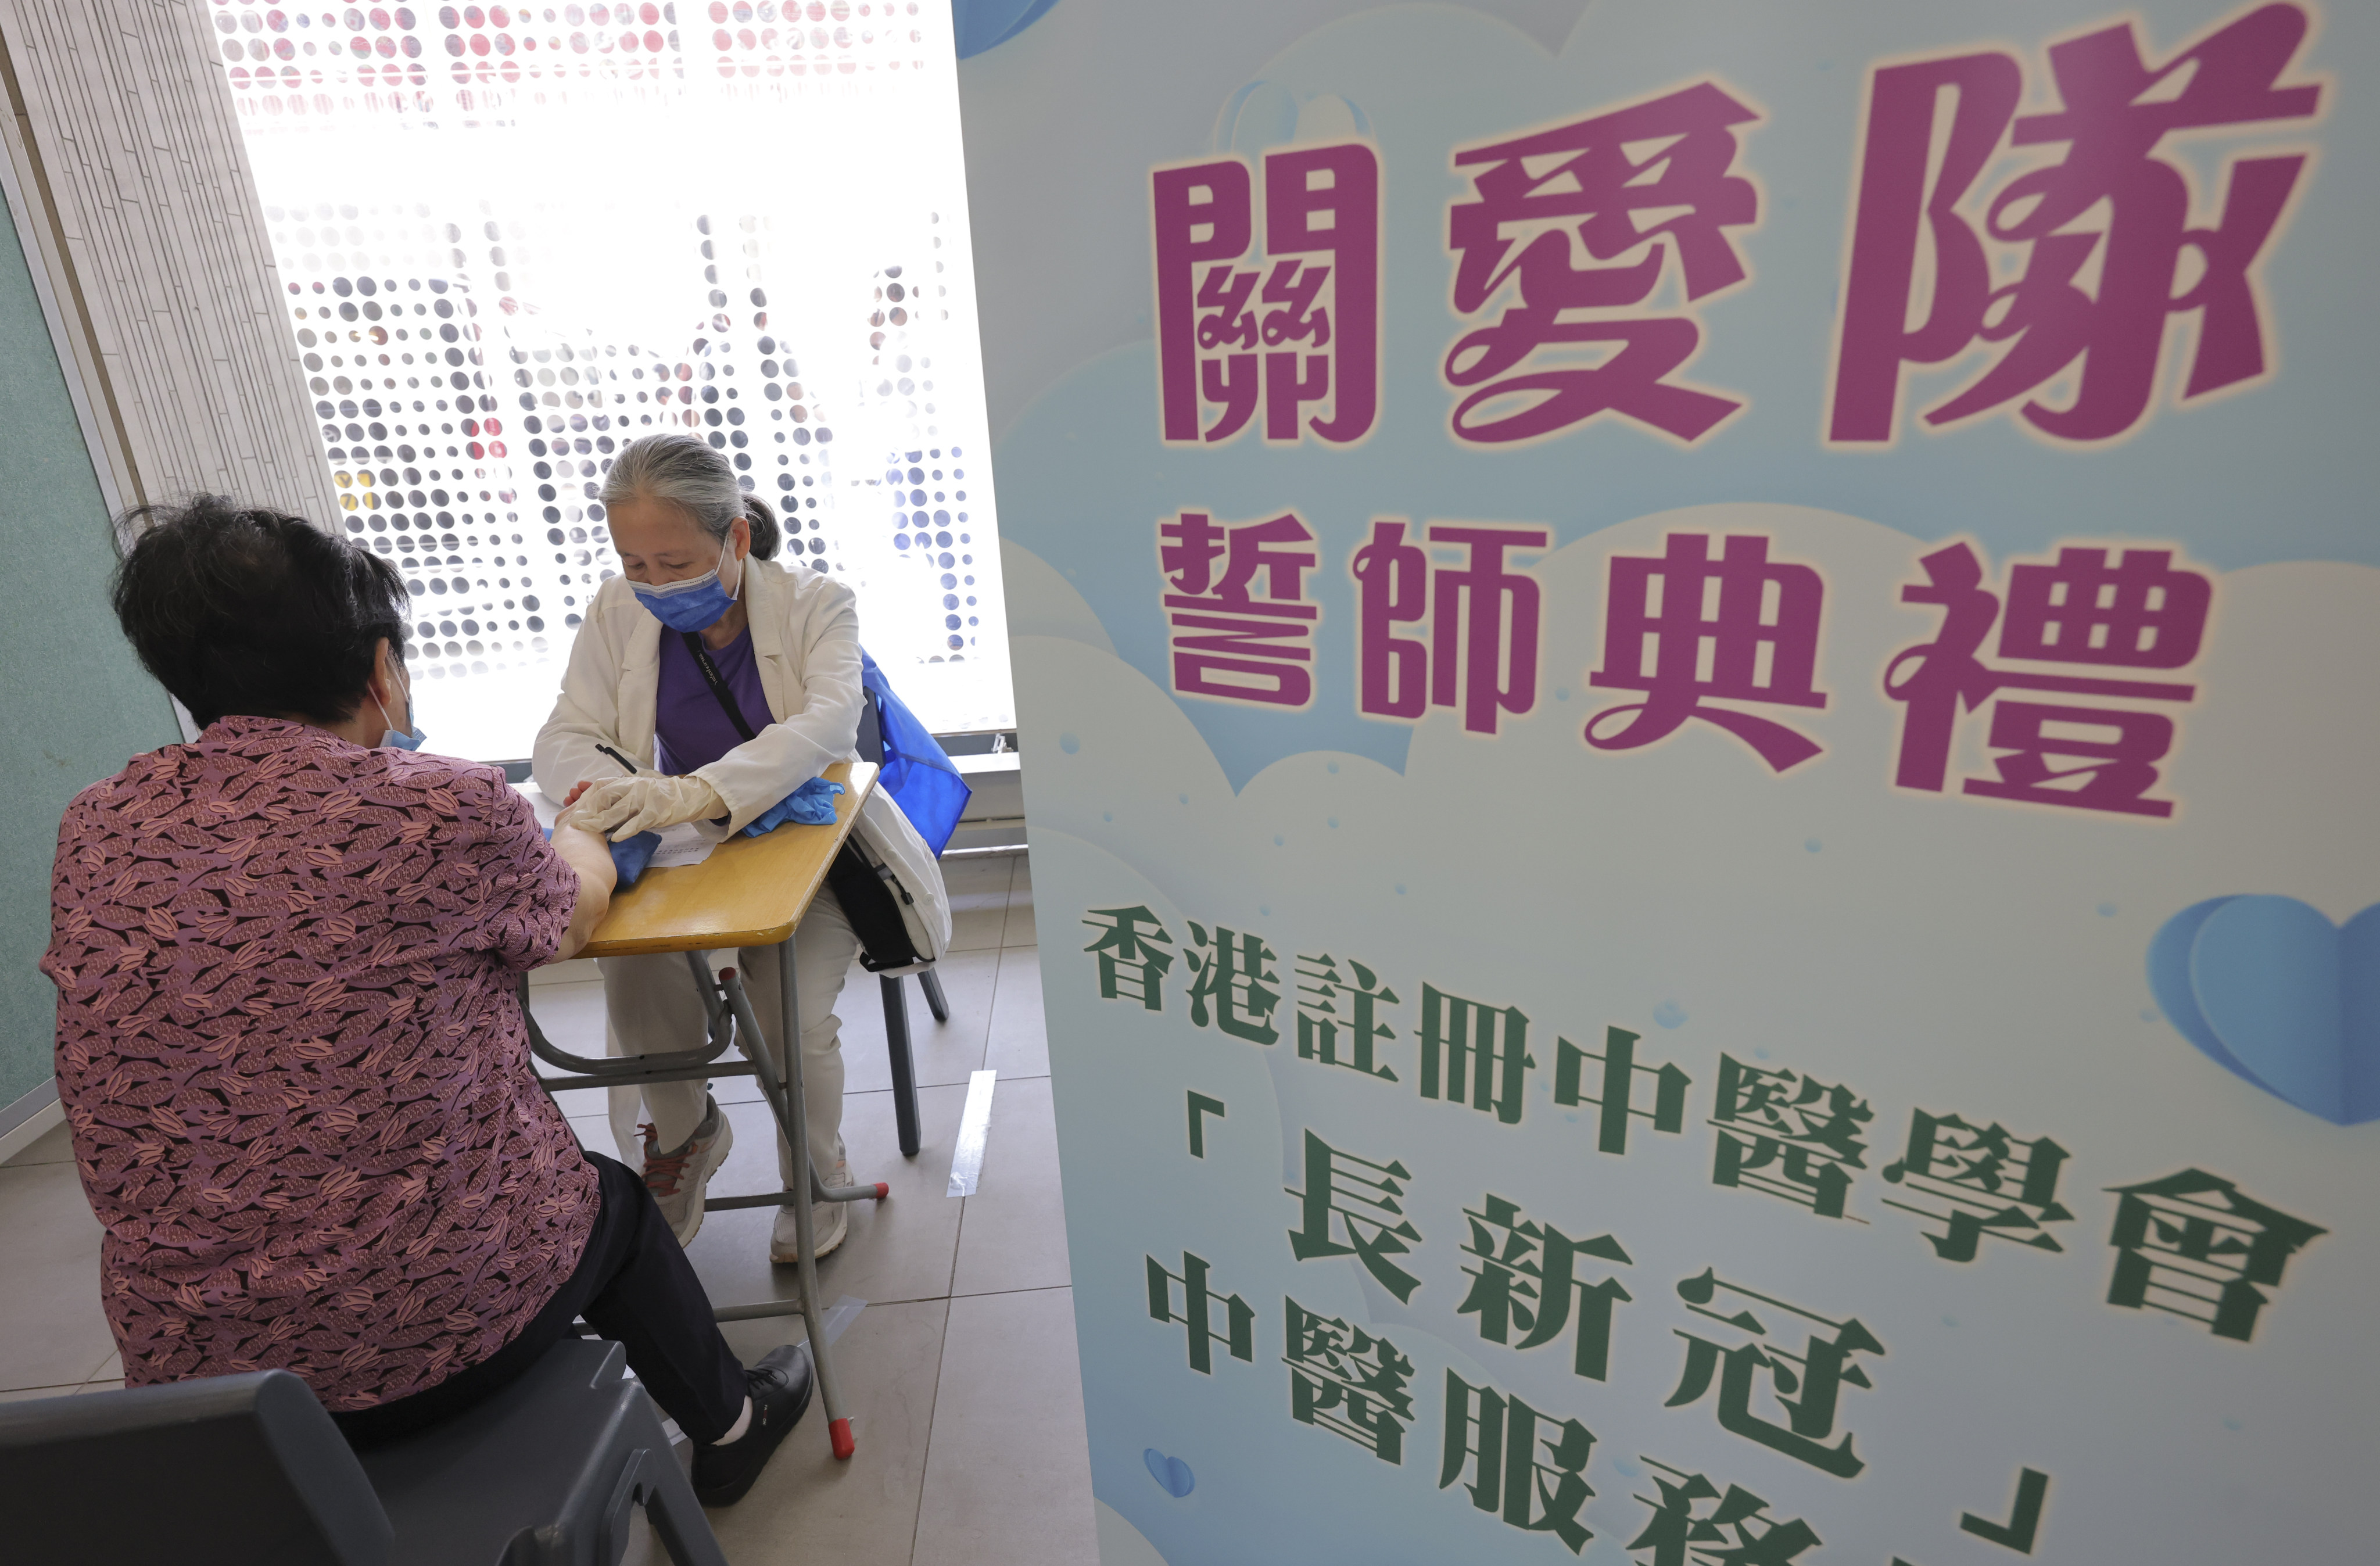 The care teams in the Southern district and Tsuen Wan were launched in April. Photo: Jelly Tse